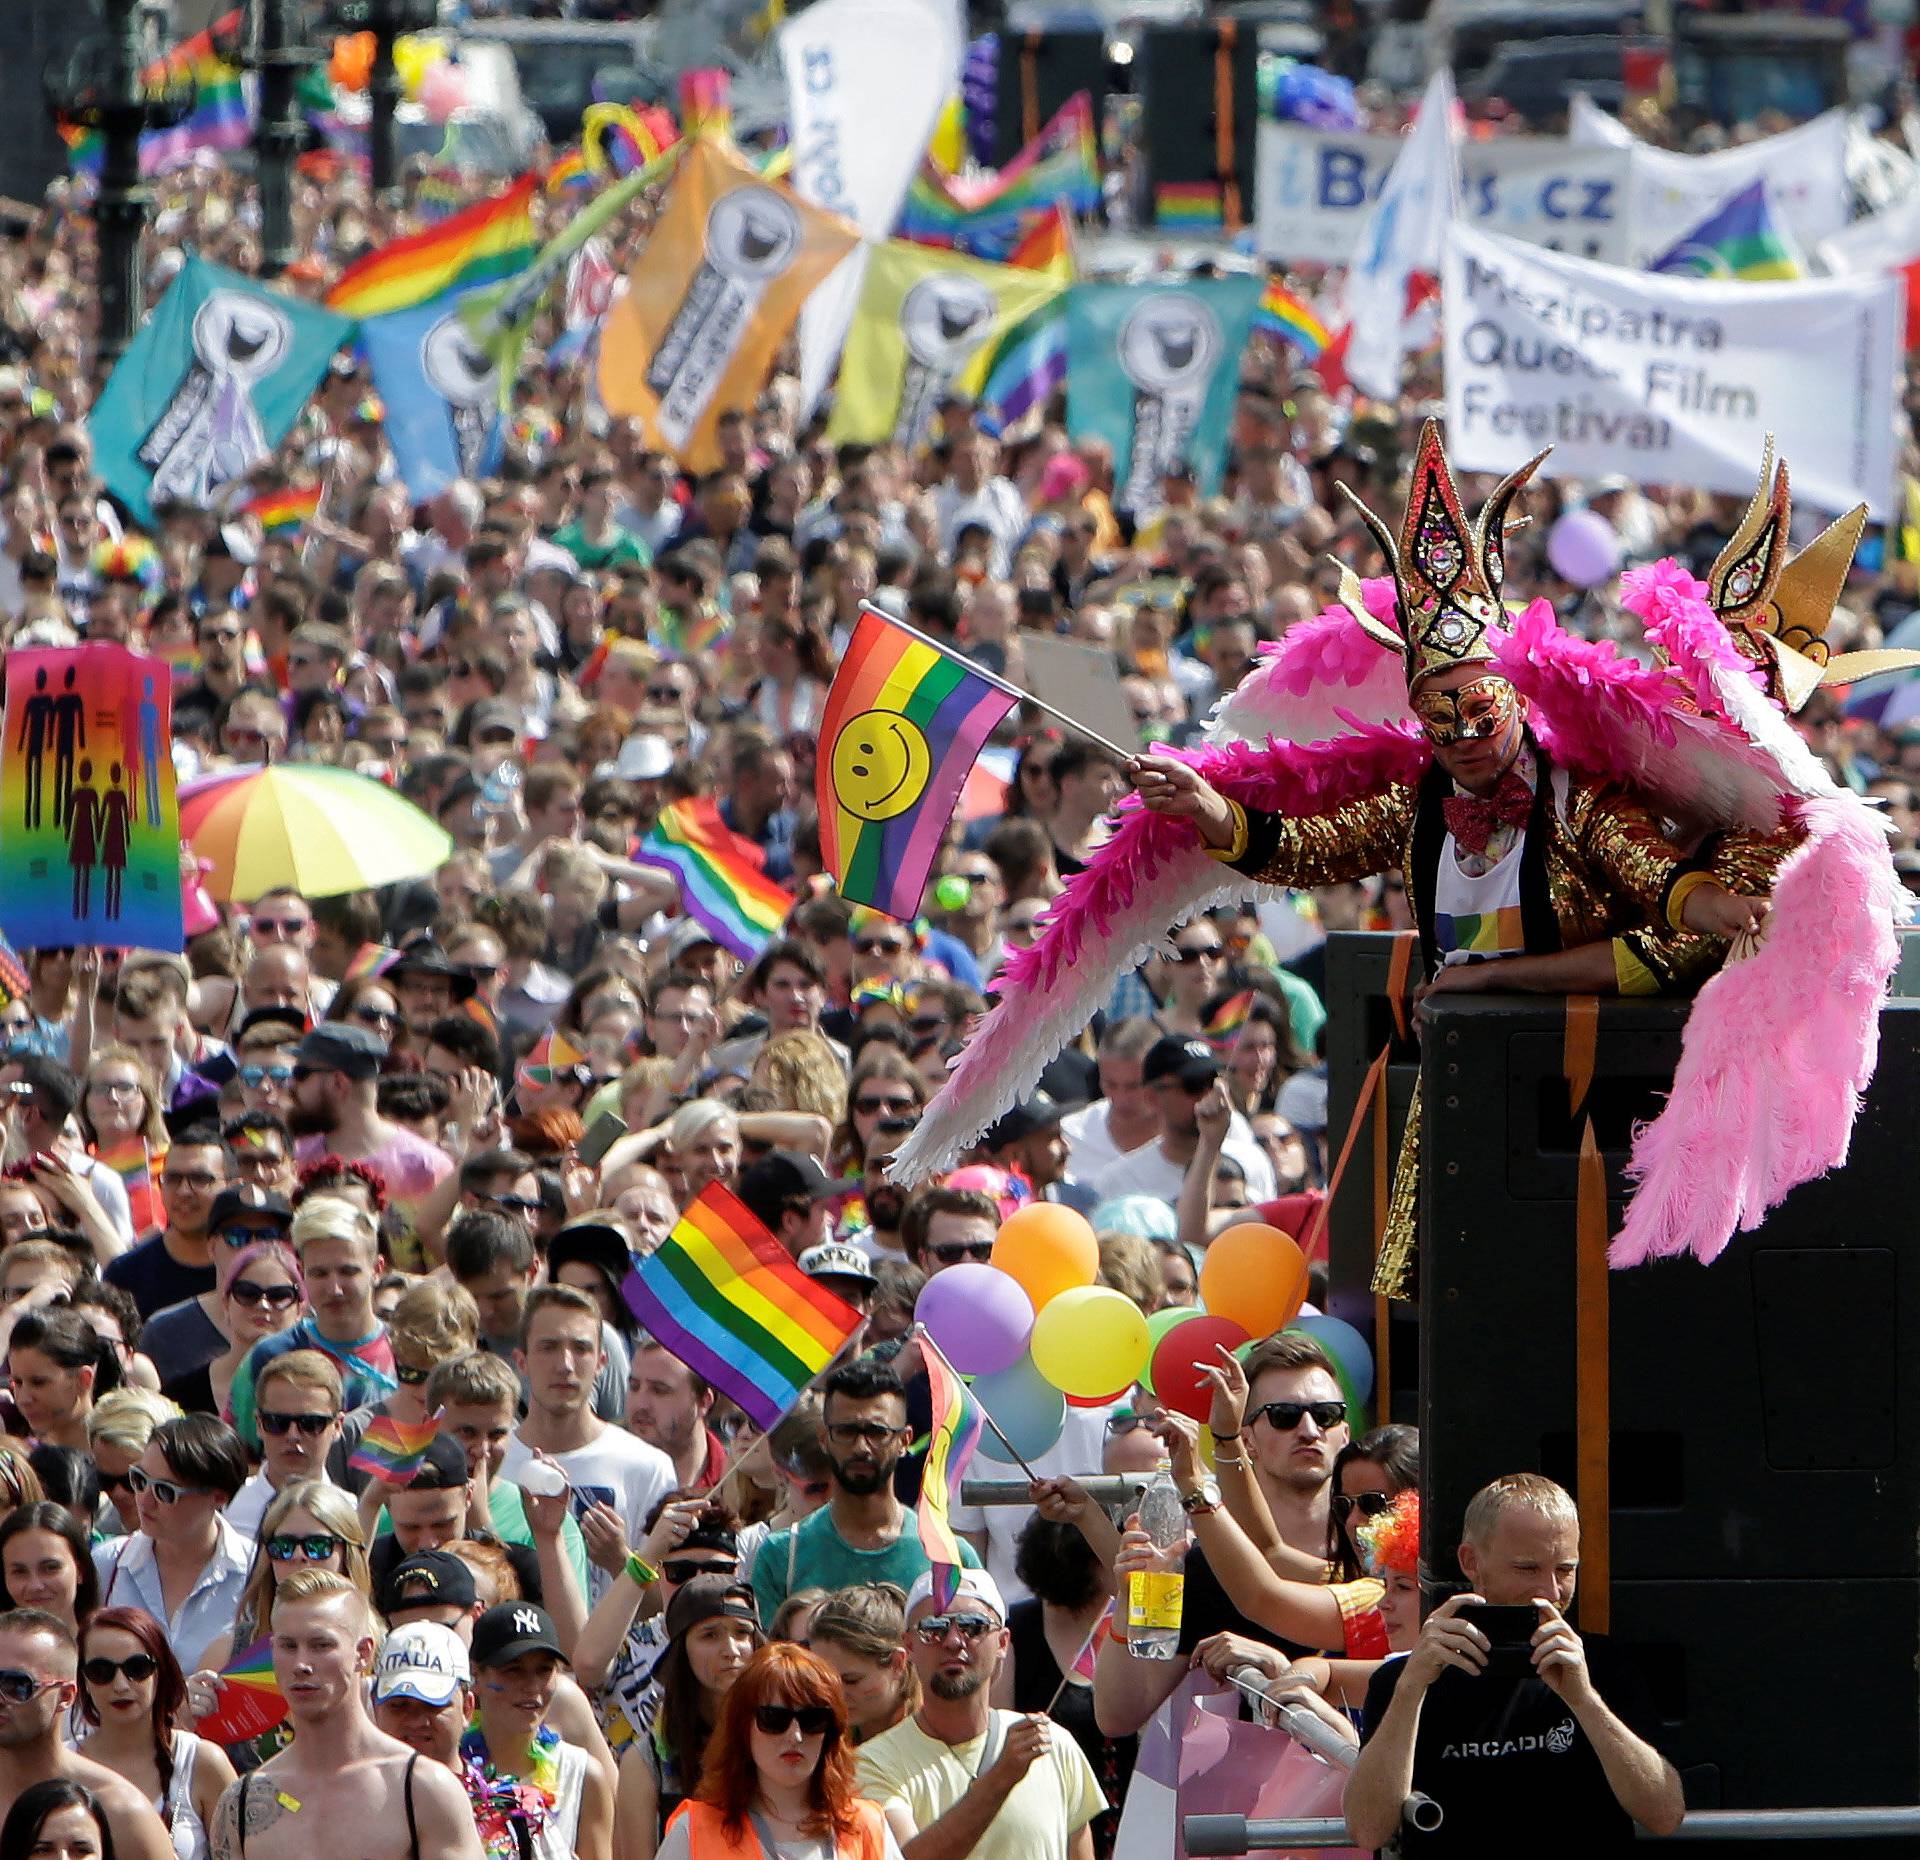 Participants hold rainbow flags during the Prague Pride Parade where thousands marched through the city centre in support of gay rights, in Czech Republic